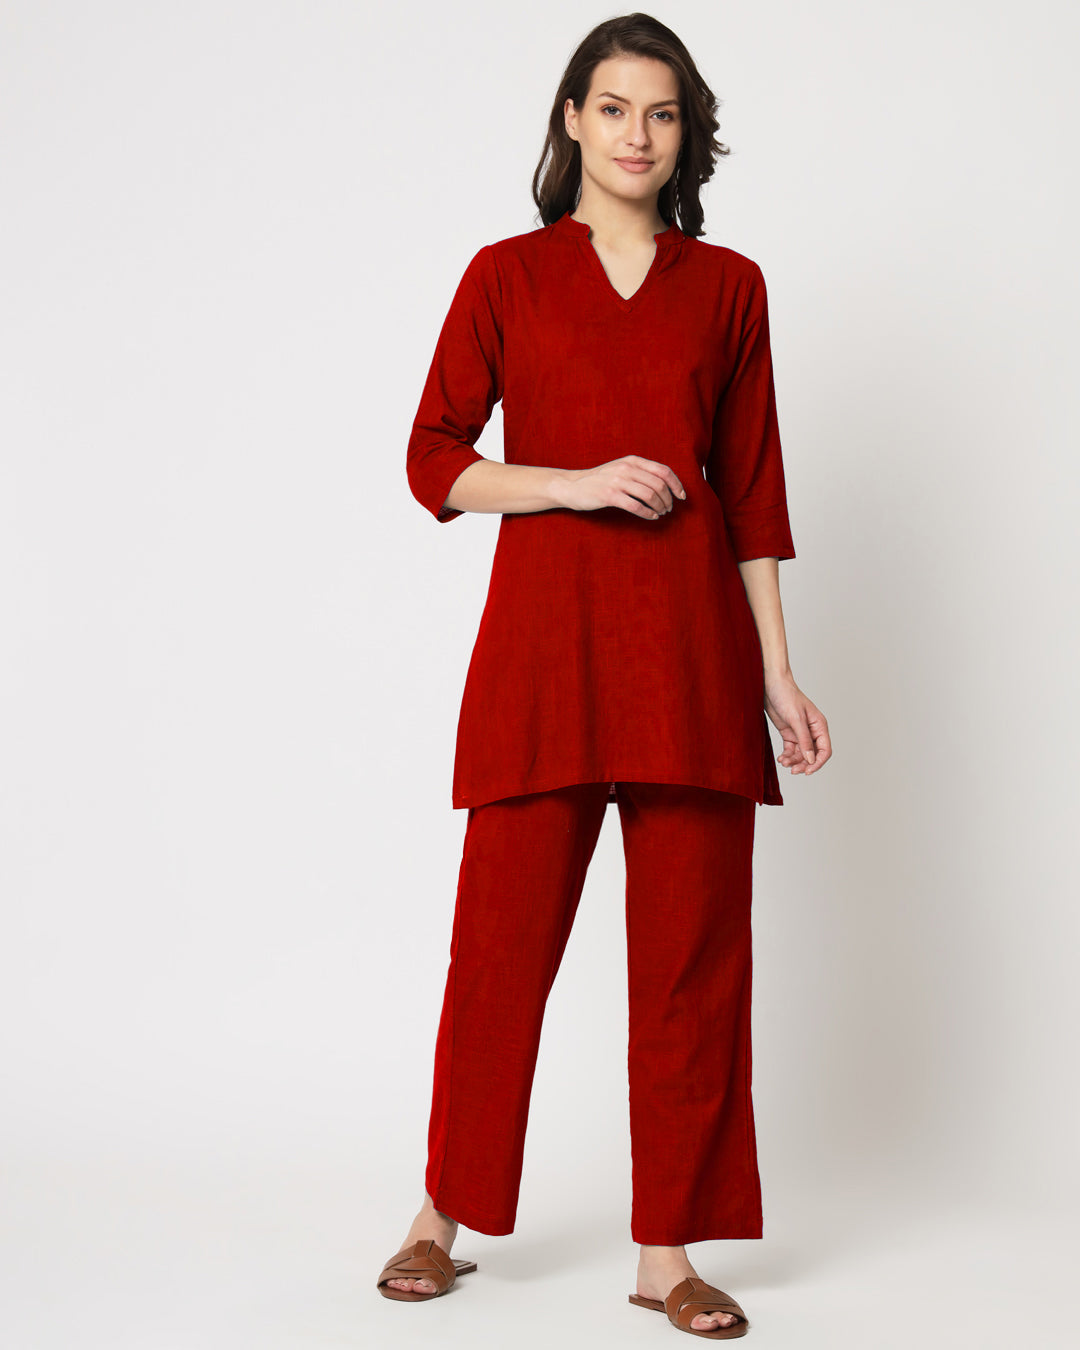 Classic Red Collar Neck Mid Length Solid Kurta (Without Bottoms)